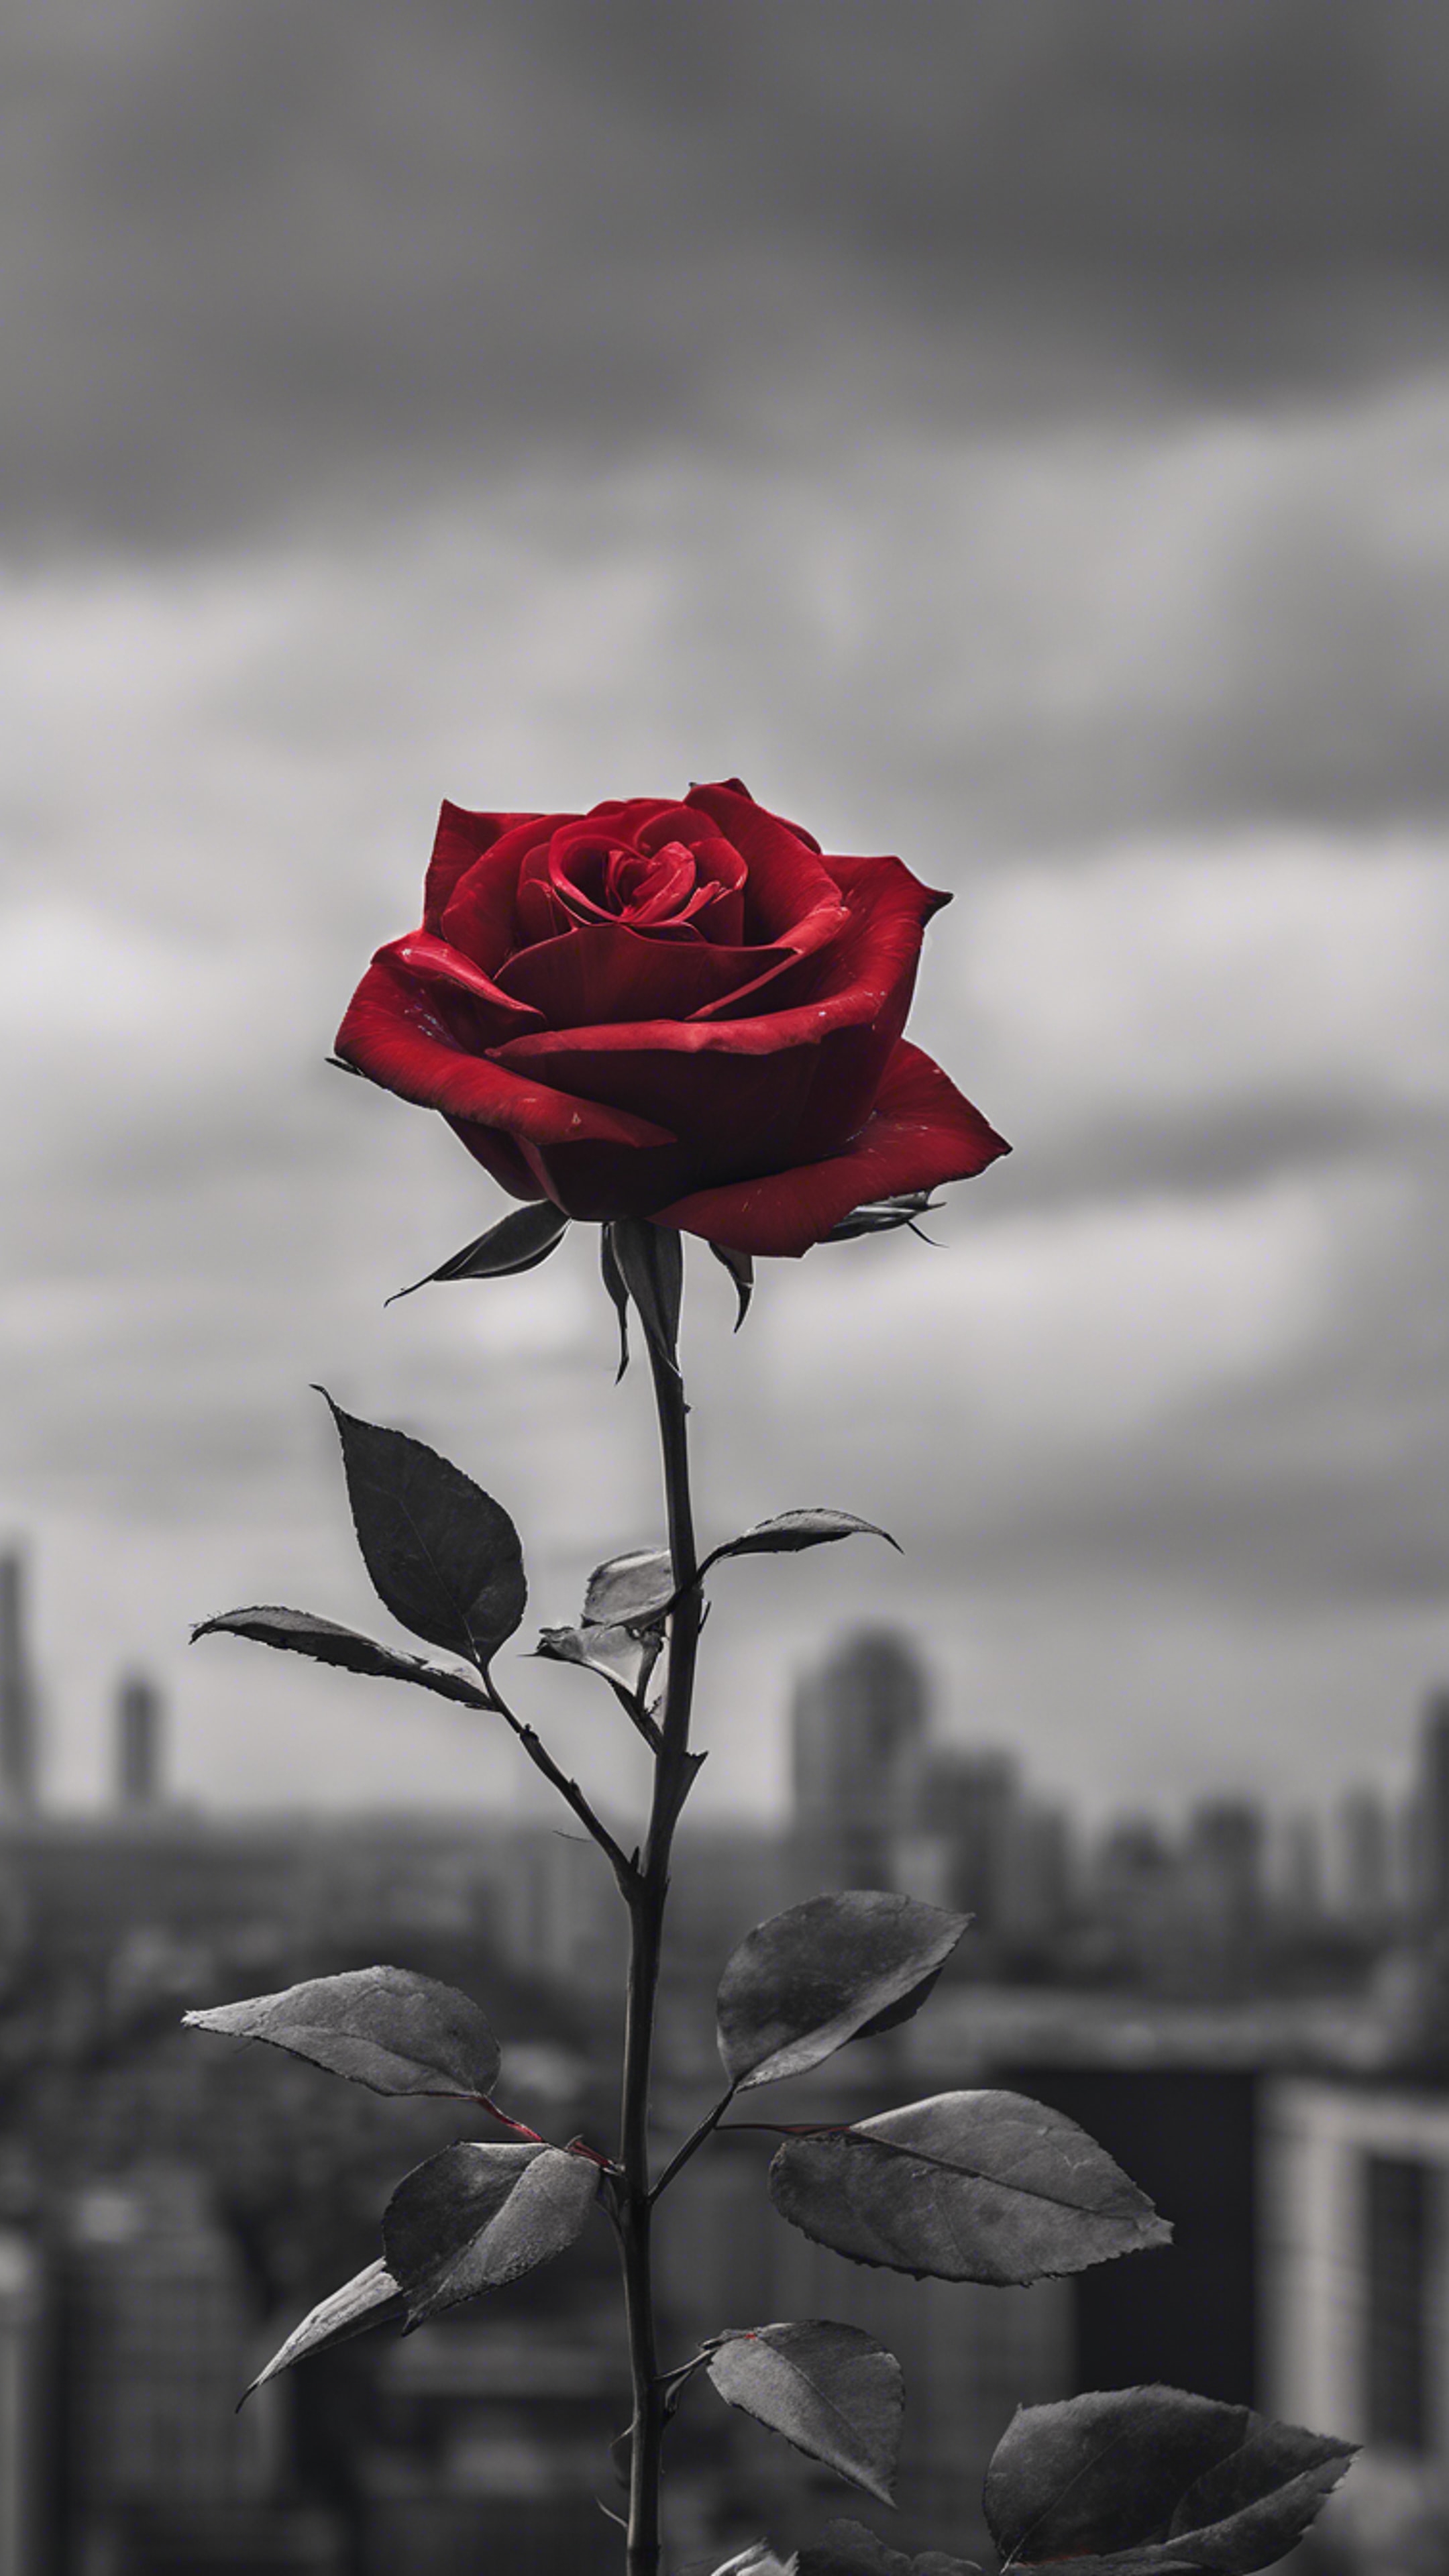 A single red rose against a stark monochromatic skyline, showcasing a blend of traditional and modern aesthetics.壁紙[06755ed57f674bb9bcbb]